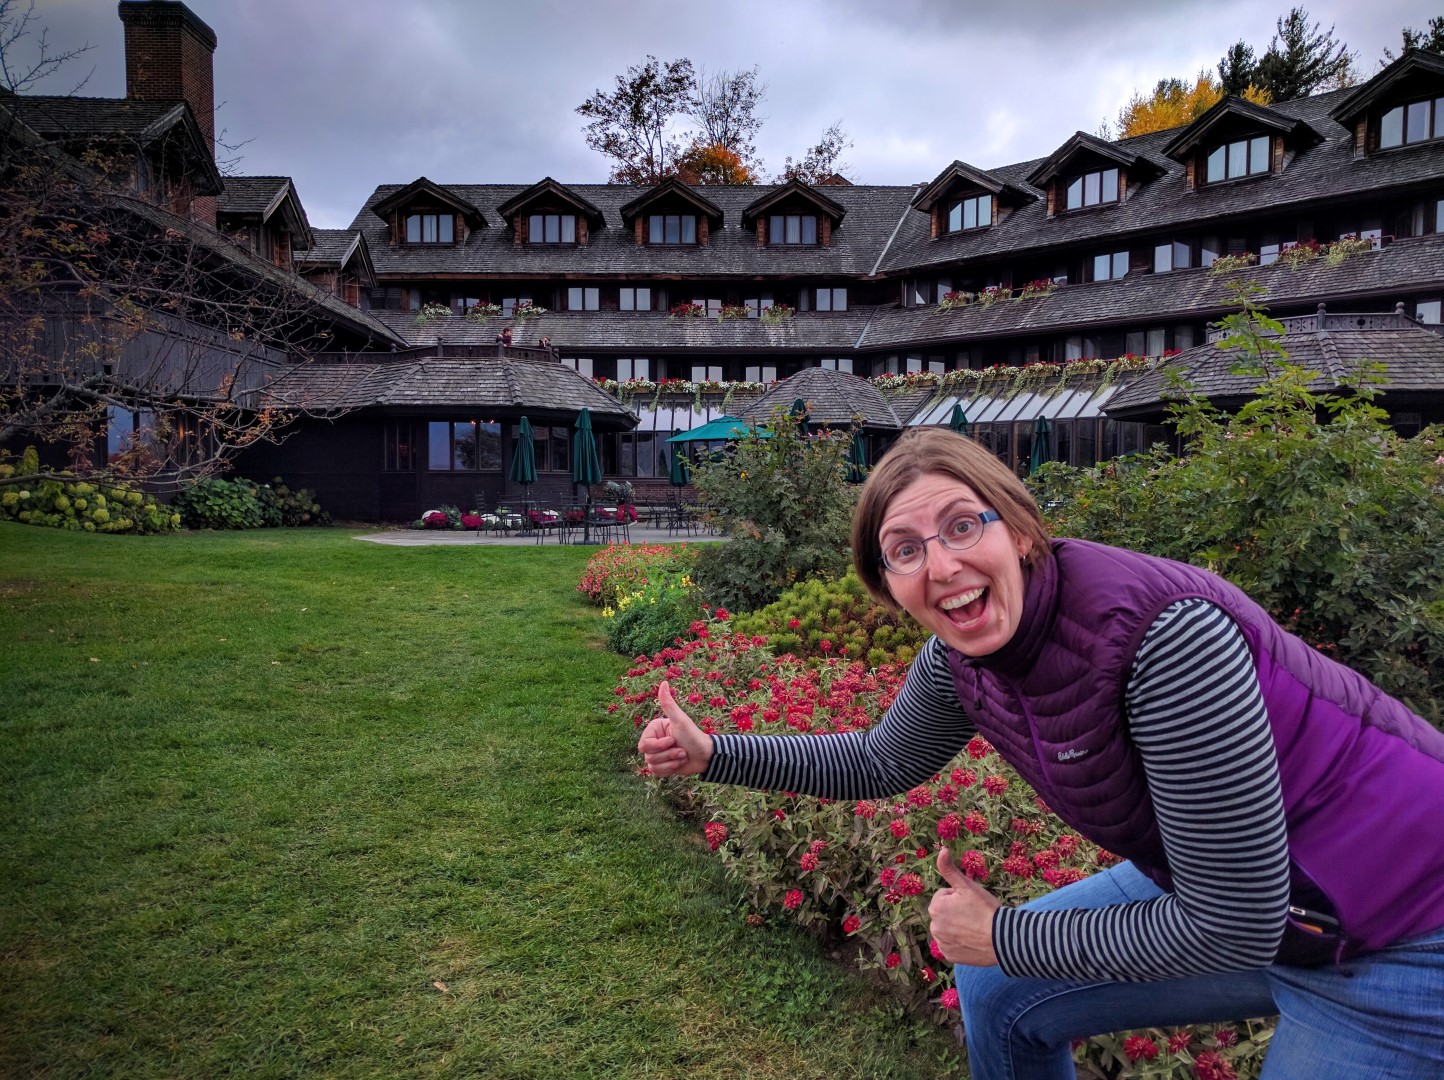 Alison visits the Trapp Family Lodge